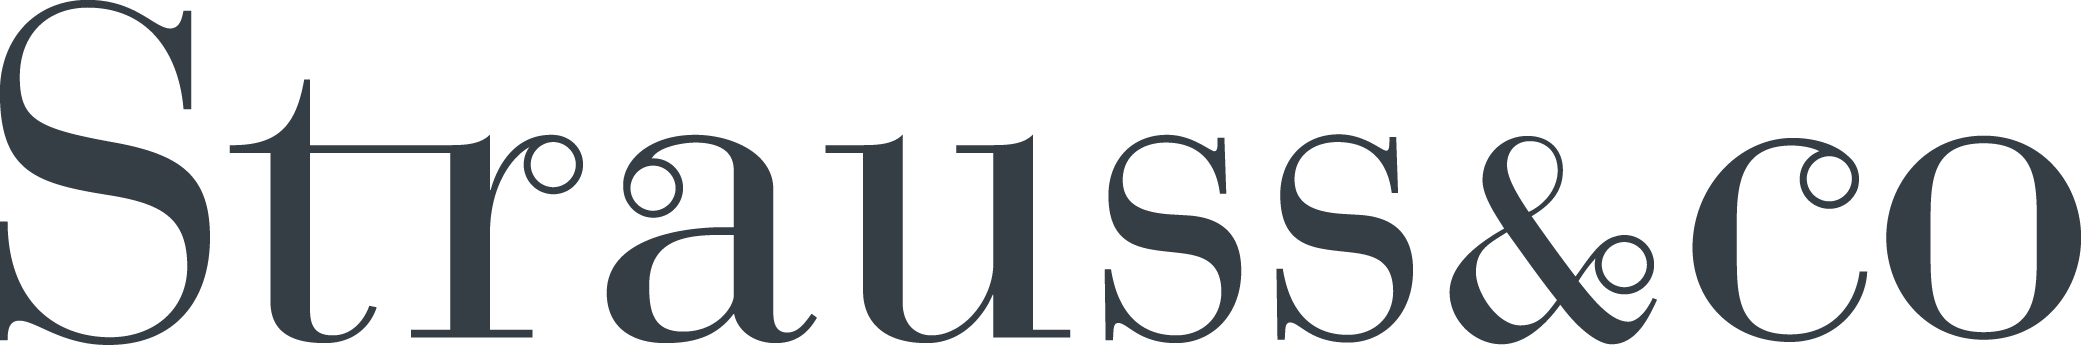 https://stratus.campaign-image.com/images/769069000022003751_zc_v1_1697885741789_strauss_co_logo_normal.png